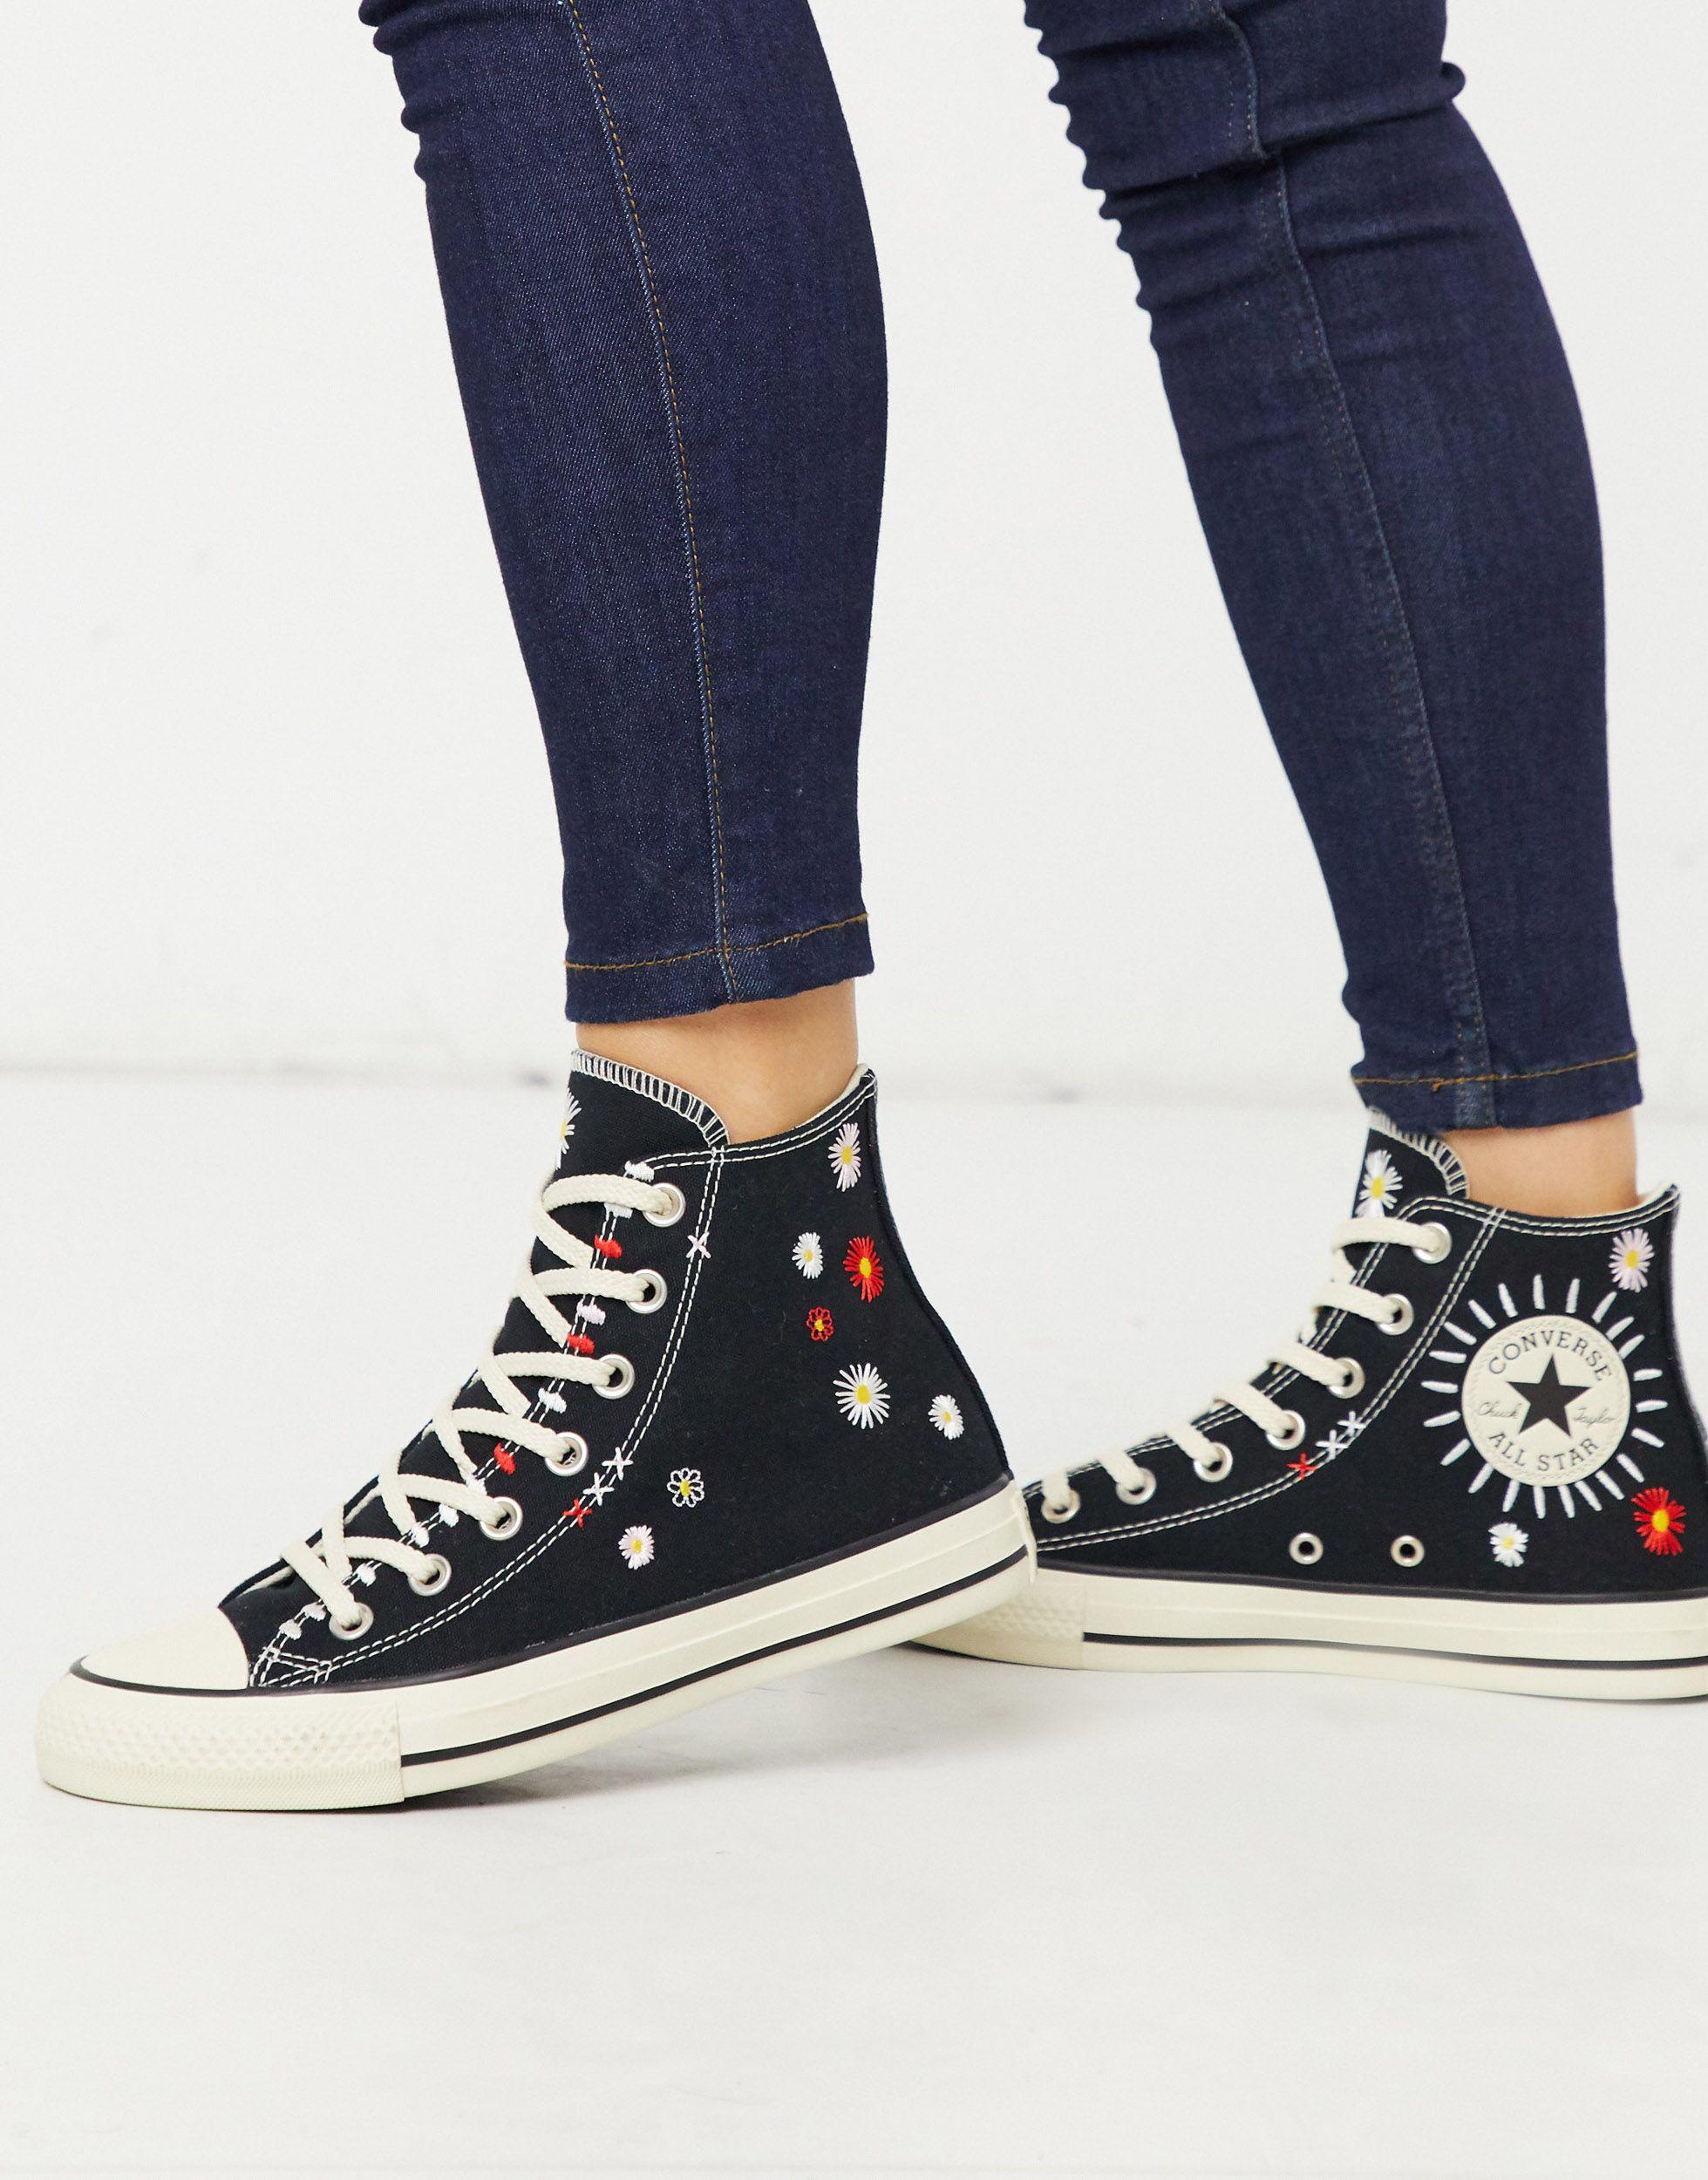 Converse Rubber Chuck Taylor All Star Hi Black Embroidered Floral Sneakers  | Lyst